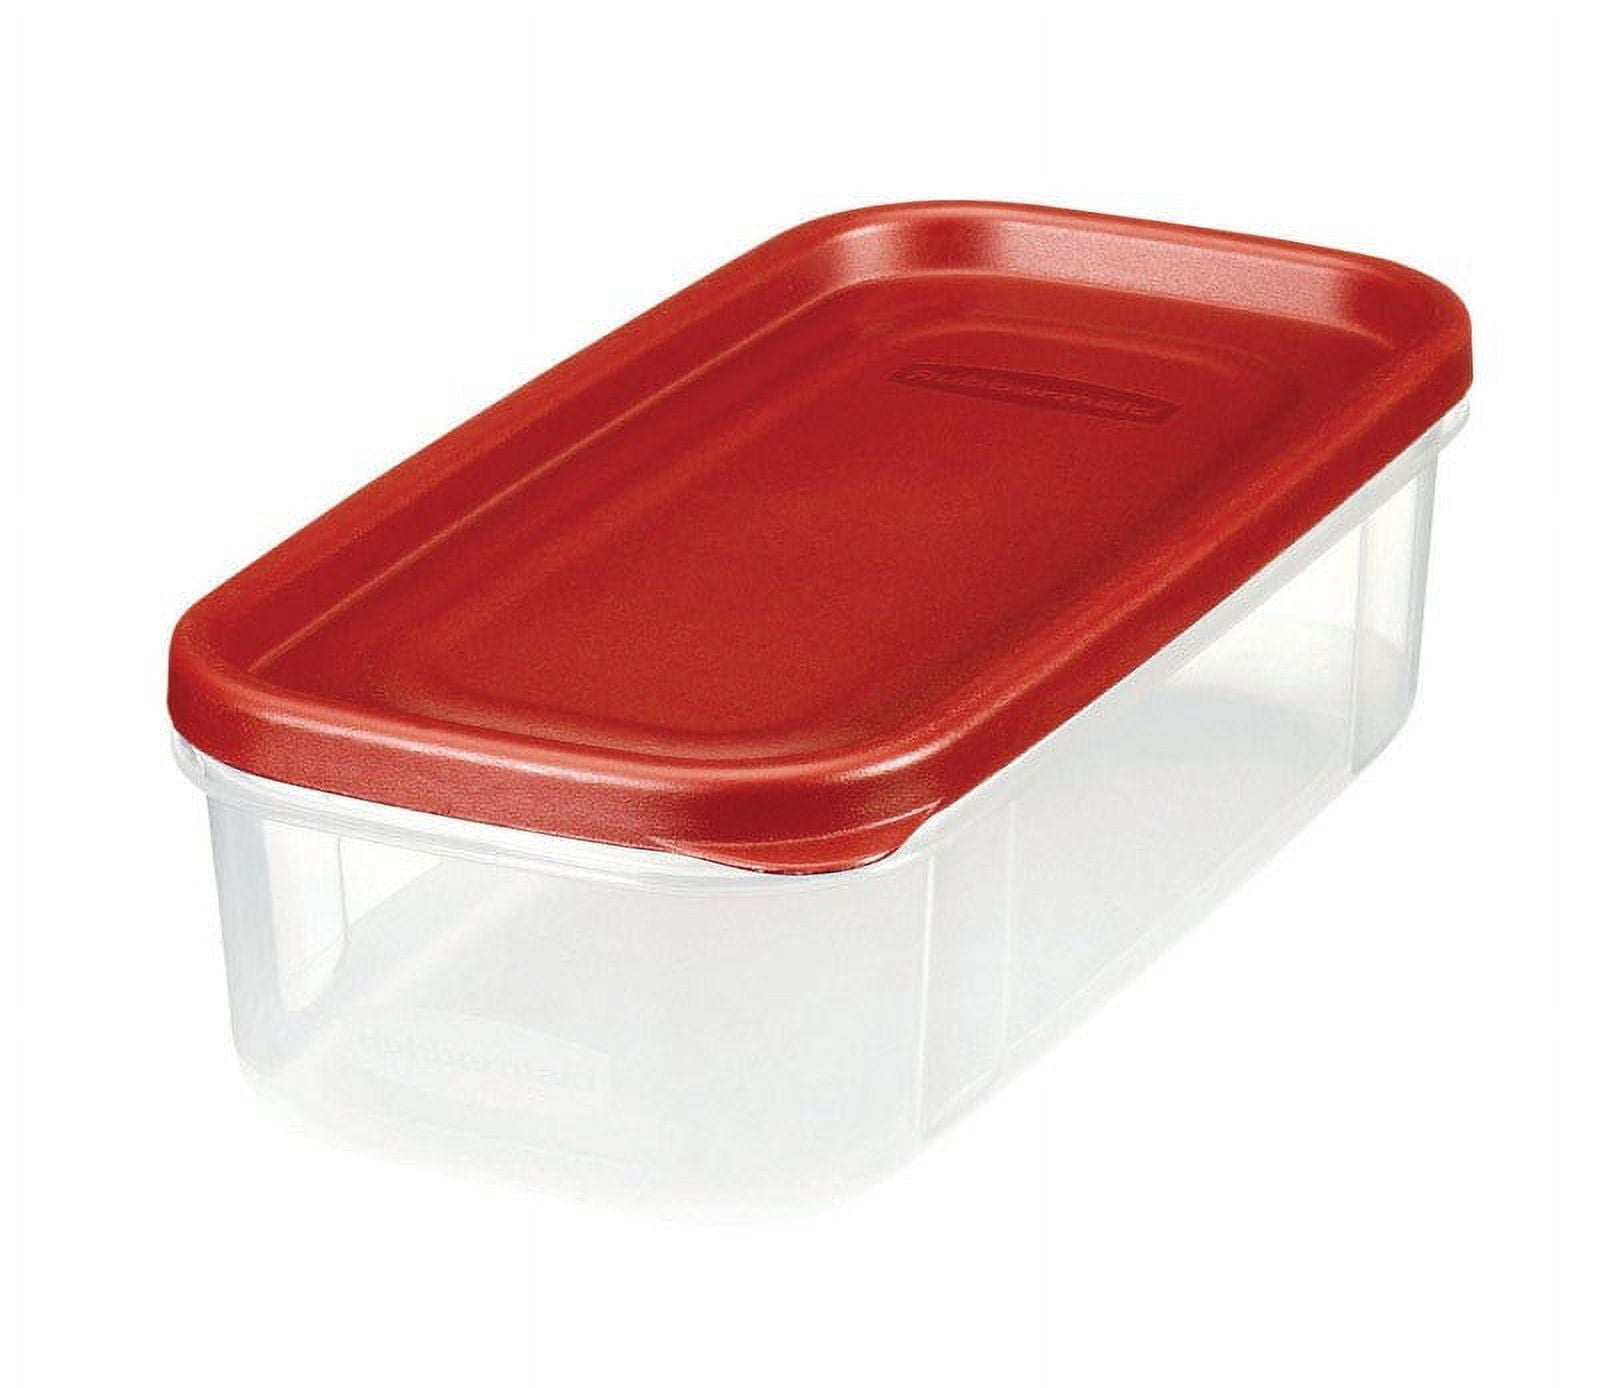 Rubbermaid Modular Food Storage 22.8 Cups Cereal Container Red